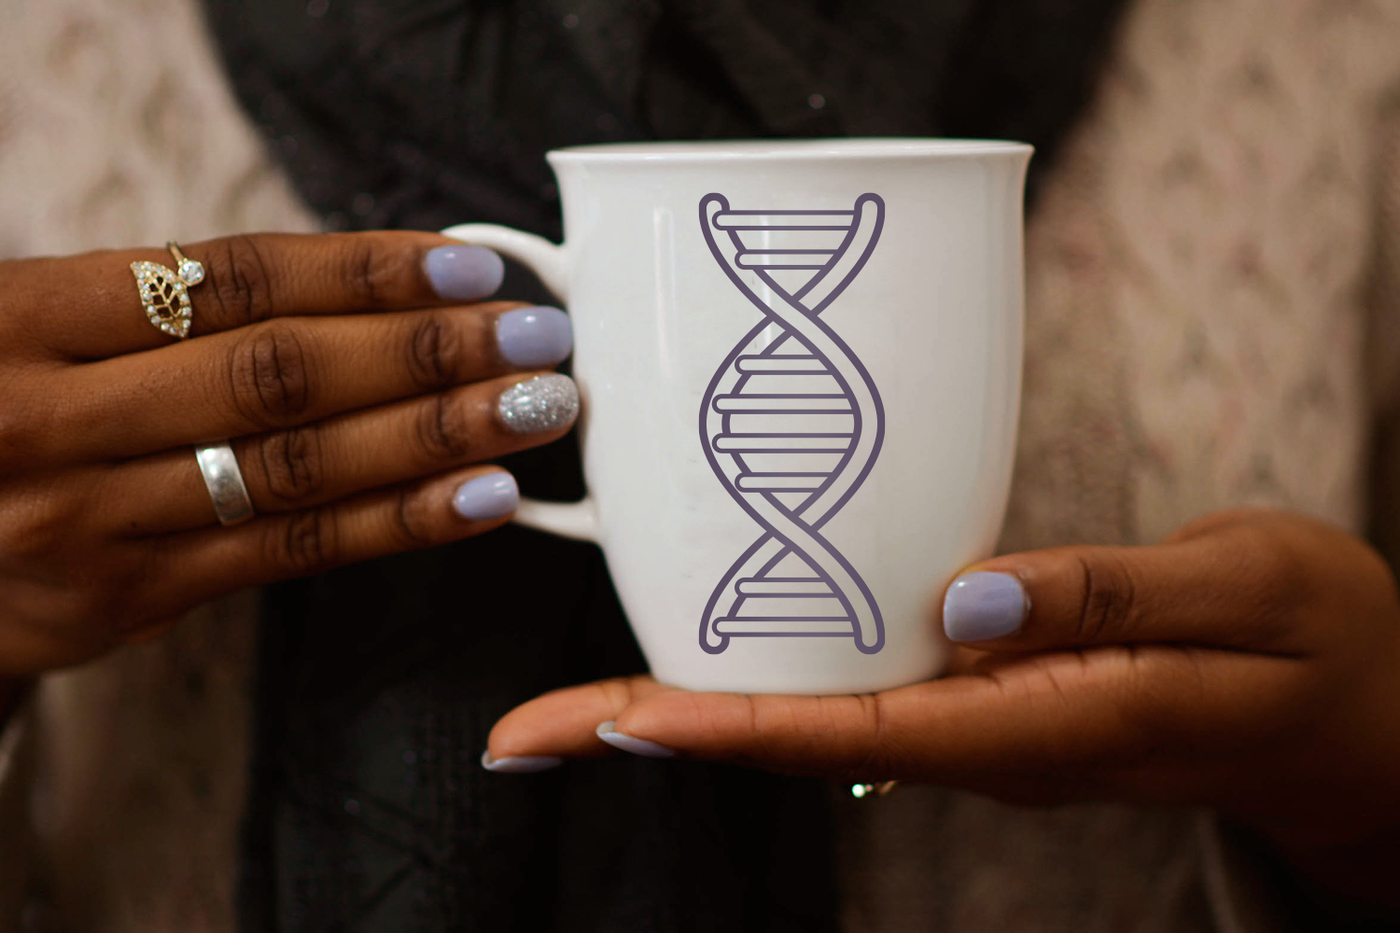 DNA design on a mug being held by a black woman with lavender nails.